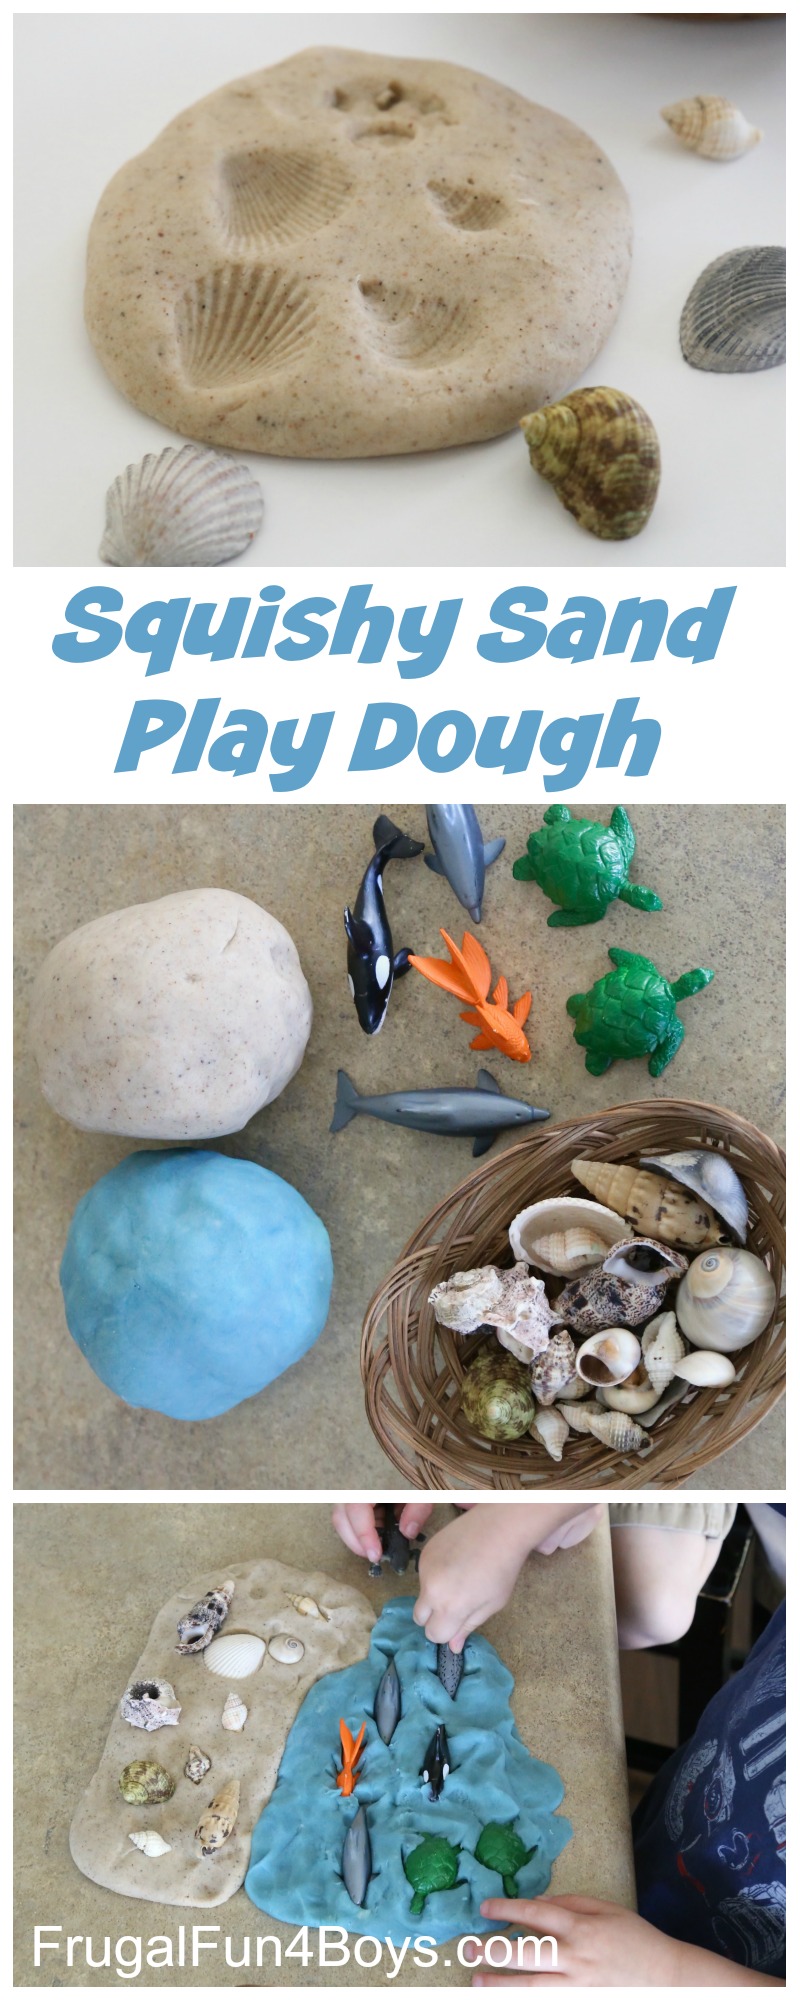 How to Make Squishy Sand Play Dough